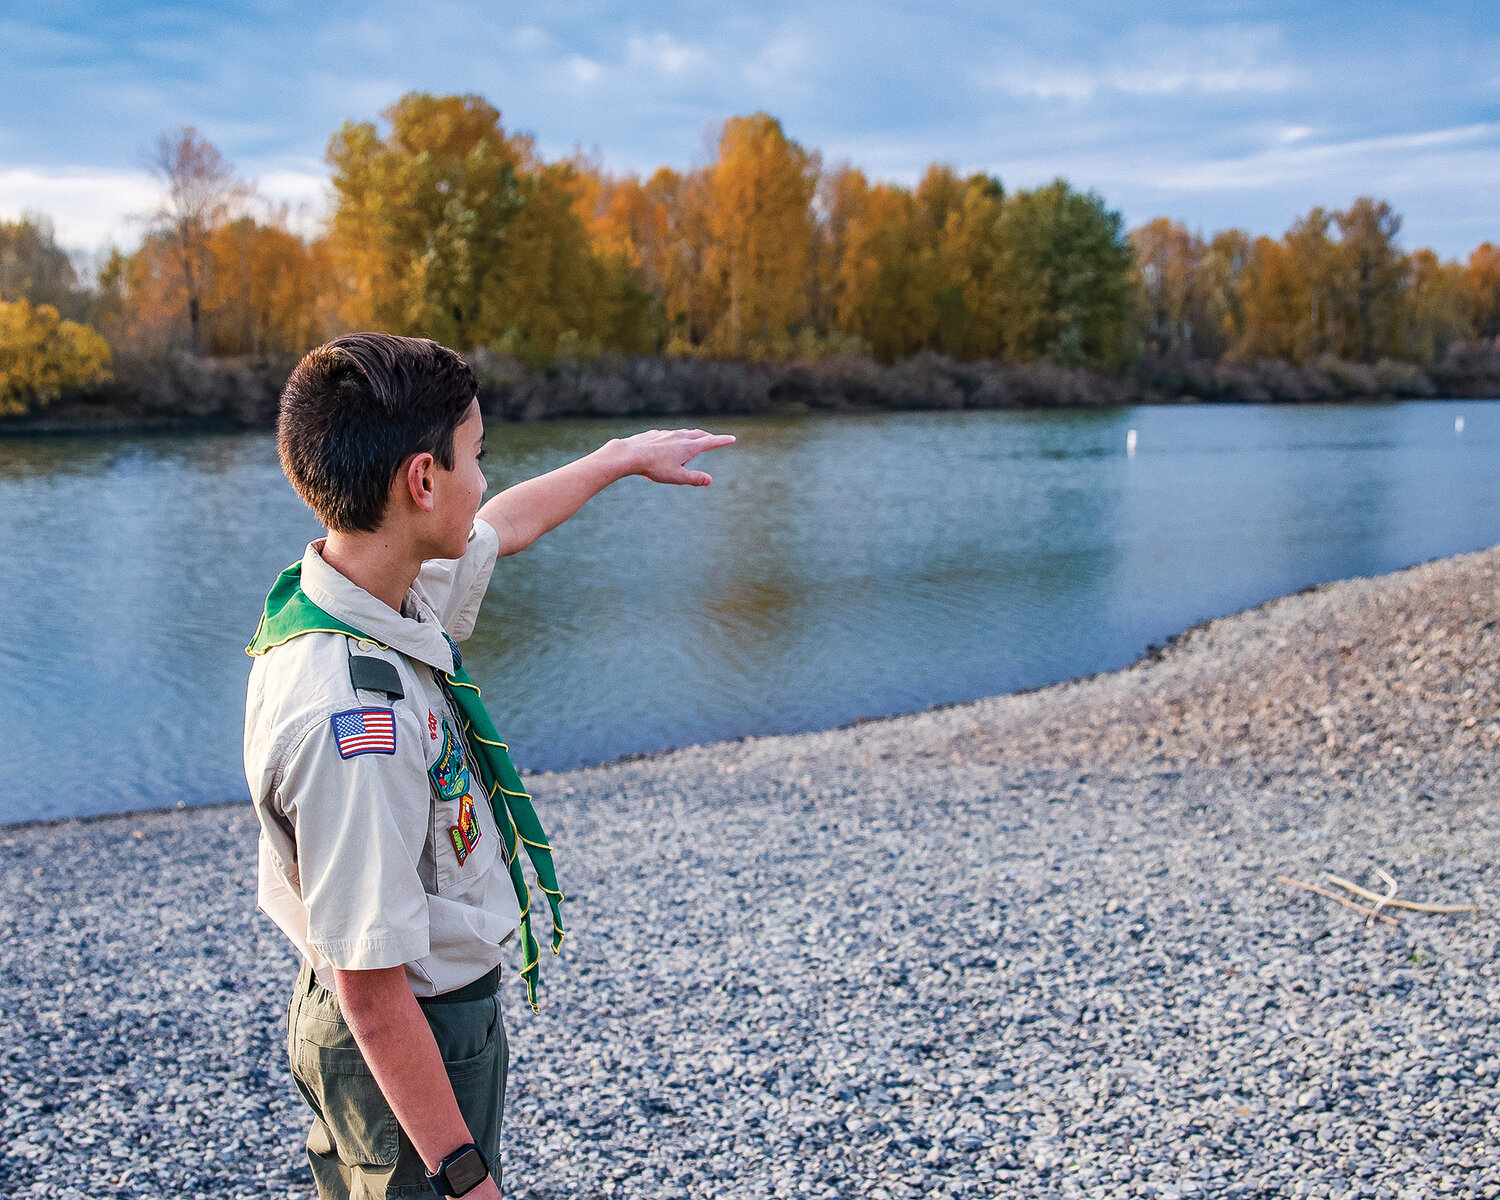 Christian Stiever,  assistant senior patrol leader with Boy Scout Troop 14, looks to the north end of Lake River from the Ridgefield Kayak Launch. His Eagle Scout project, planned for April of next year, is to report abandoned boats in Lake River and around Bachelor Island to the Port of Ridgefield.